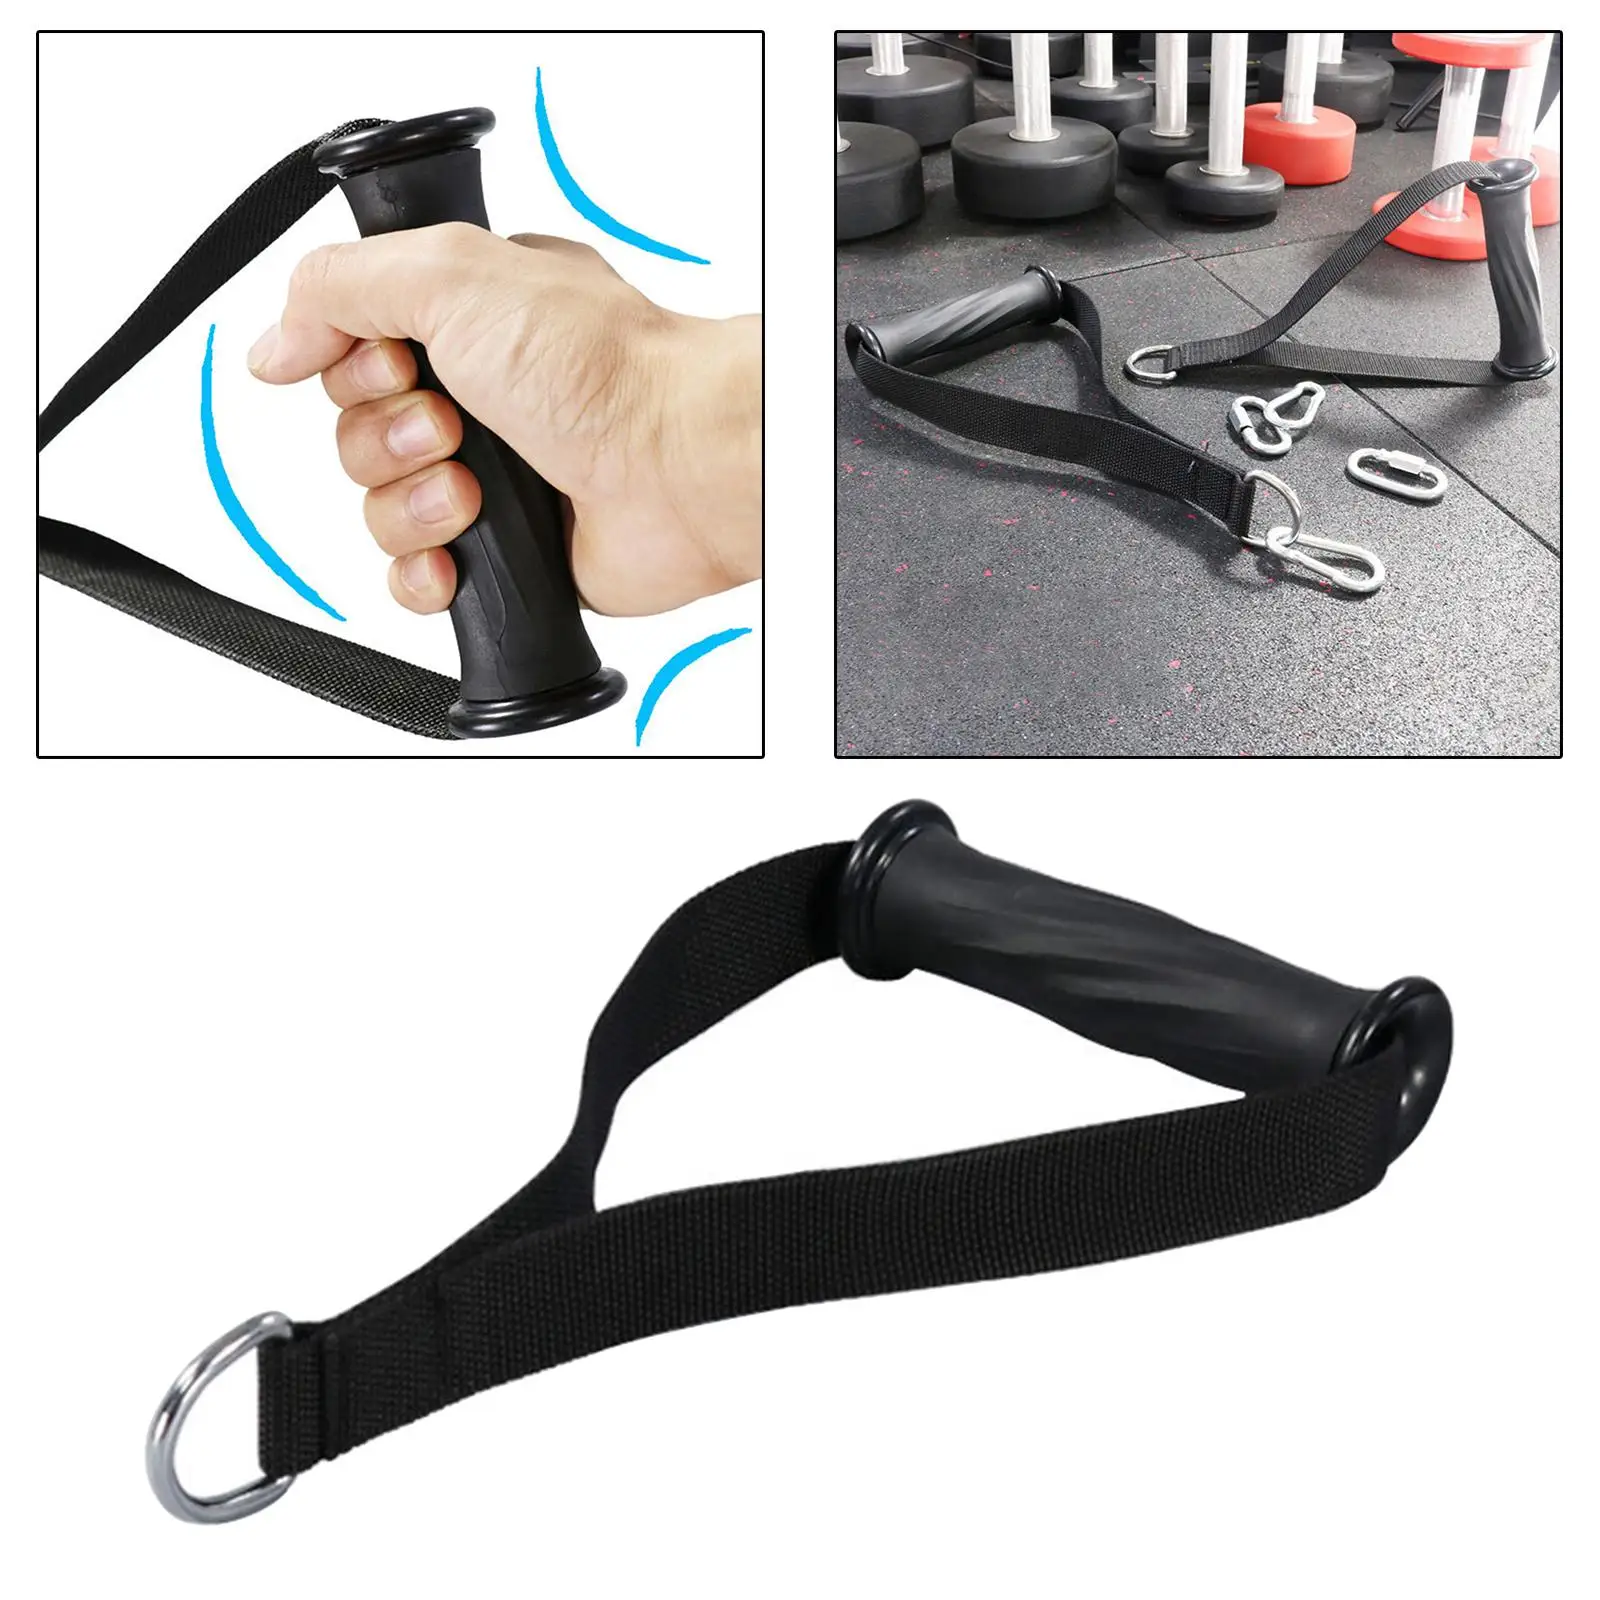 Universal Cable Machine Attachment Handles Exercise Workout Grips Heavy Duty